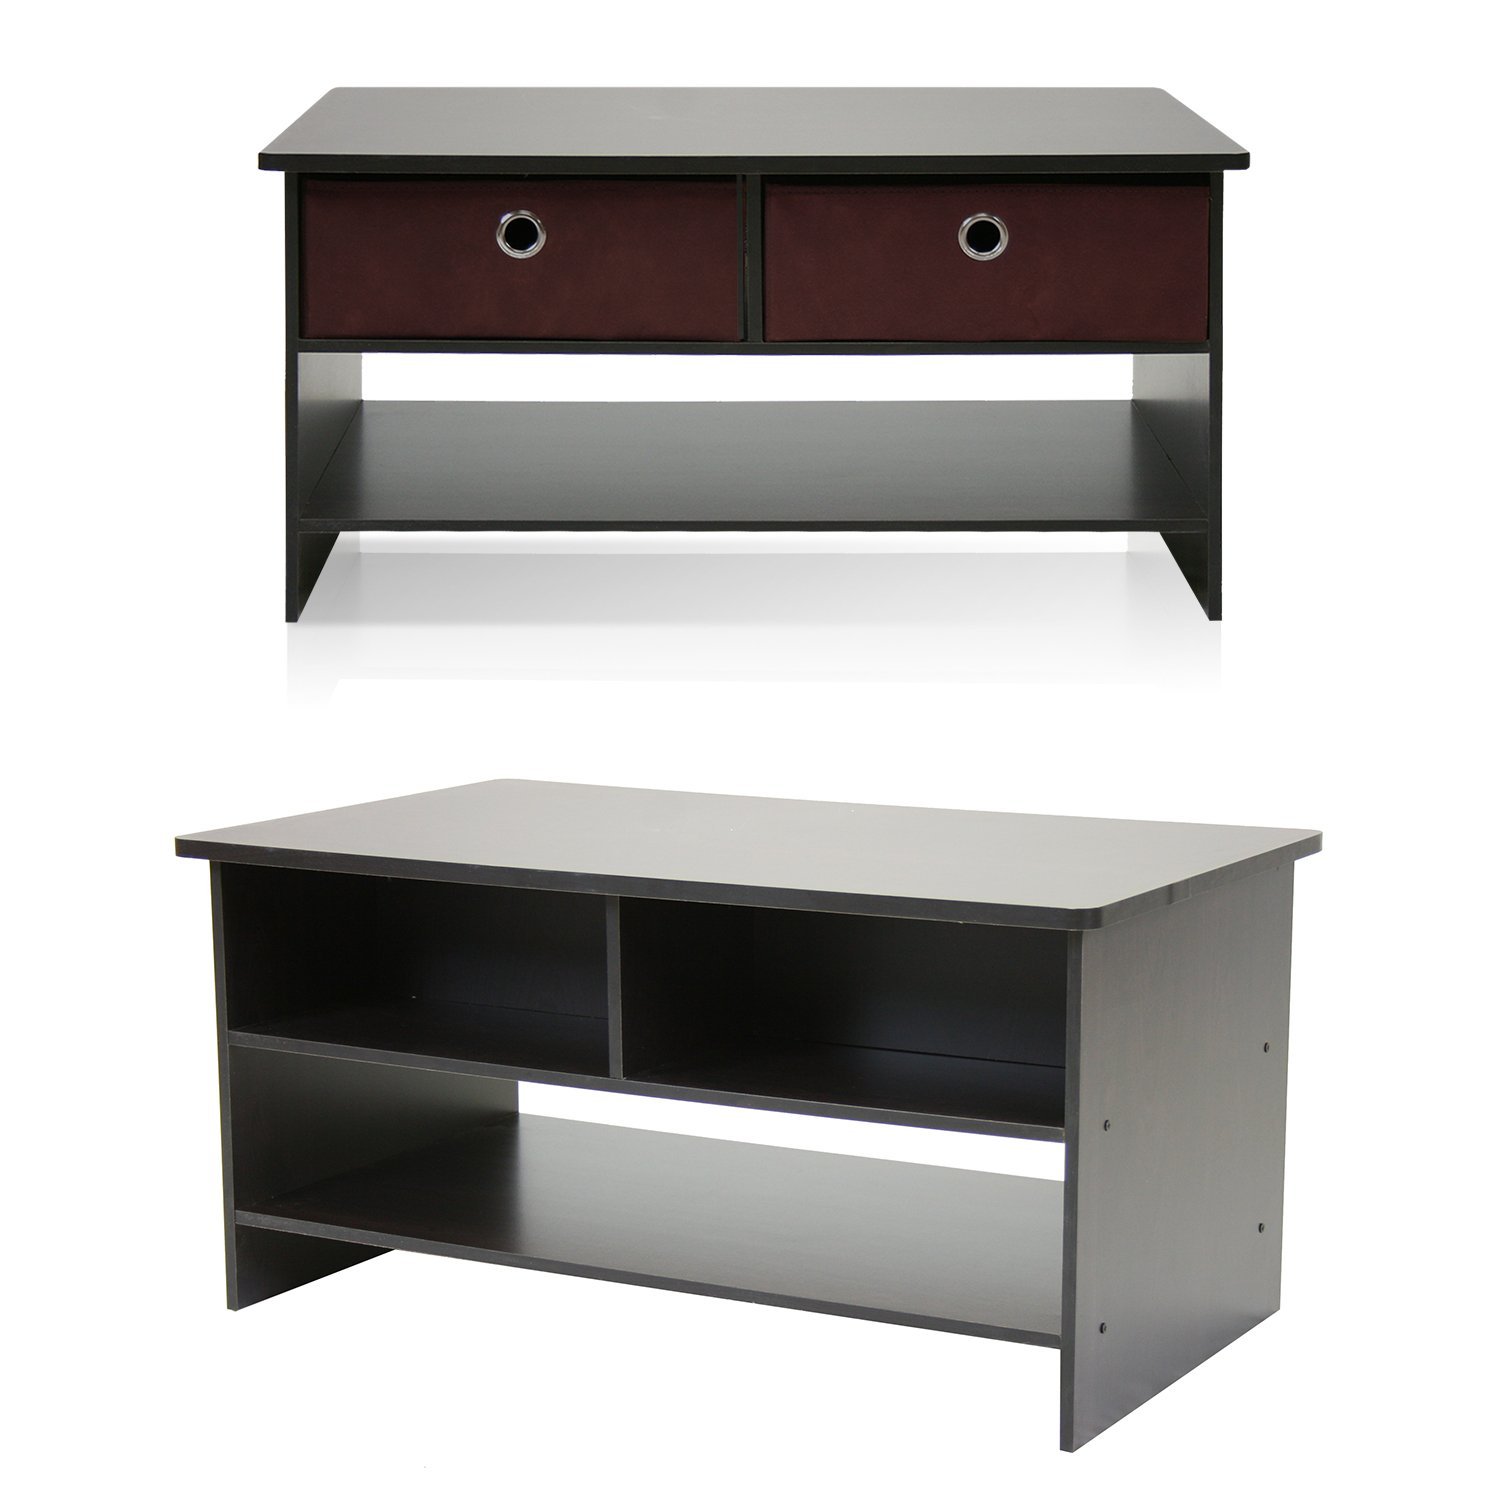 Furinno 10003EX/BR Espresso Finish Living Set, Center Coffee Table with 4 Bin-Type Drawers